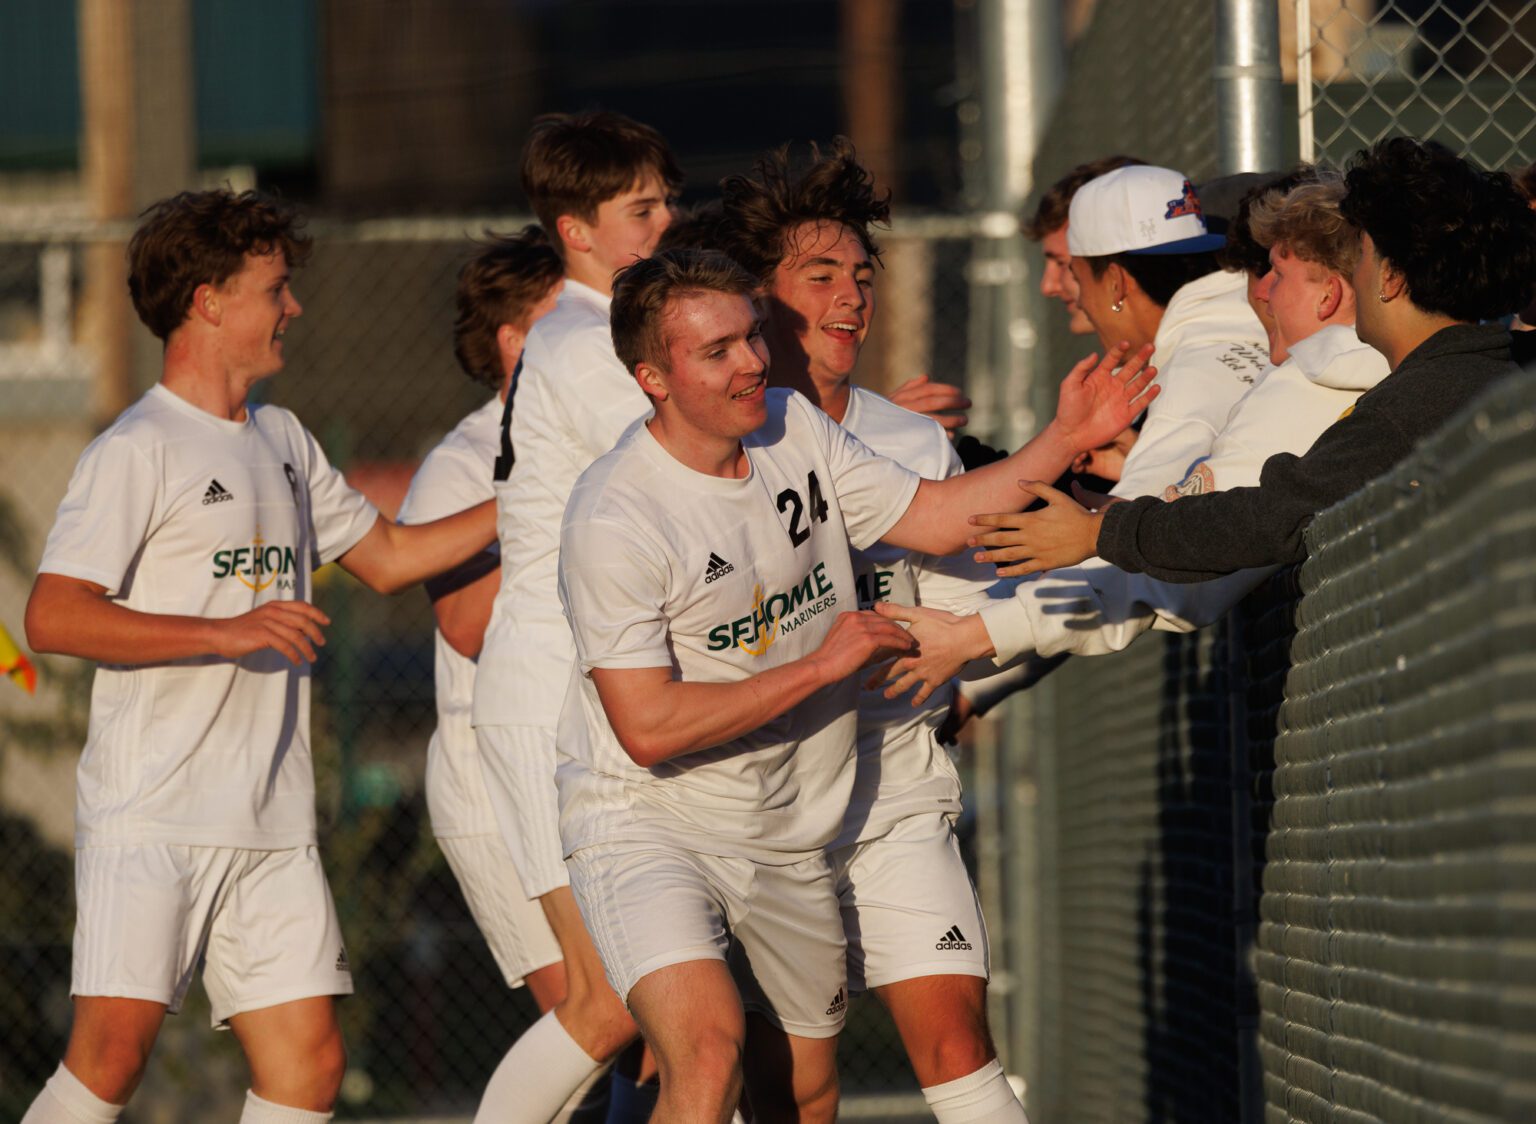 Sehome's Noah Allen (24) high-fives fans Monday, April 15 after scoring the first goal of a 3-0 road win over Bellingham.